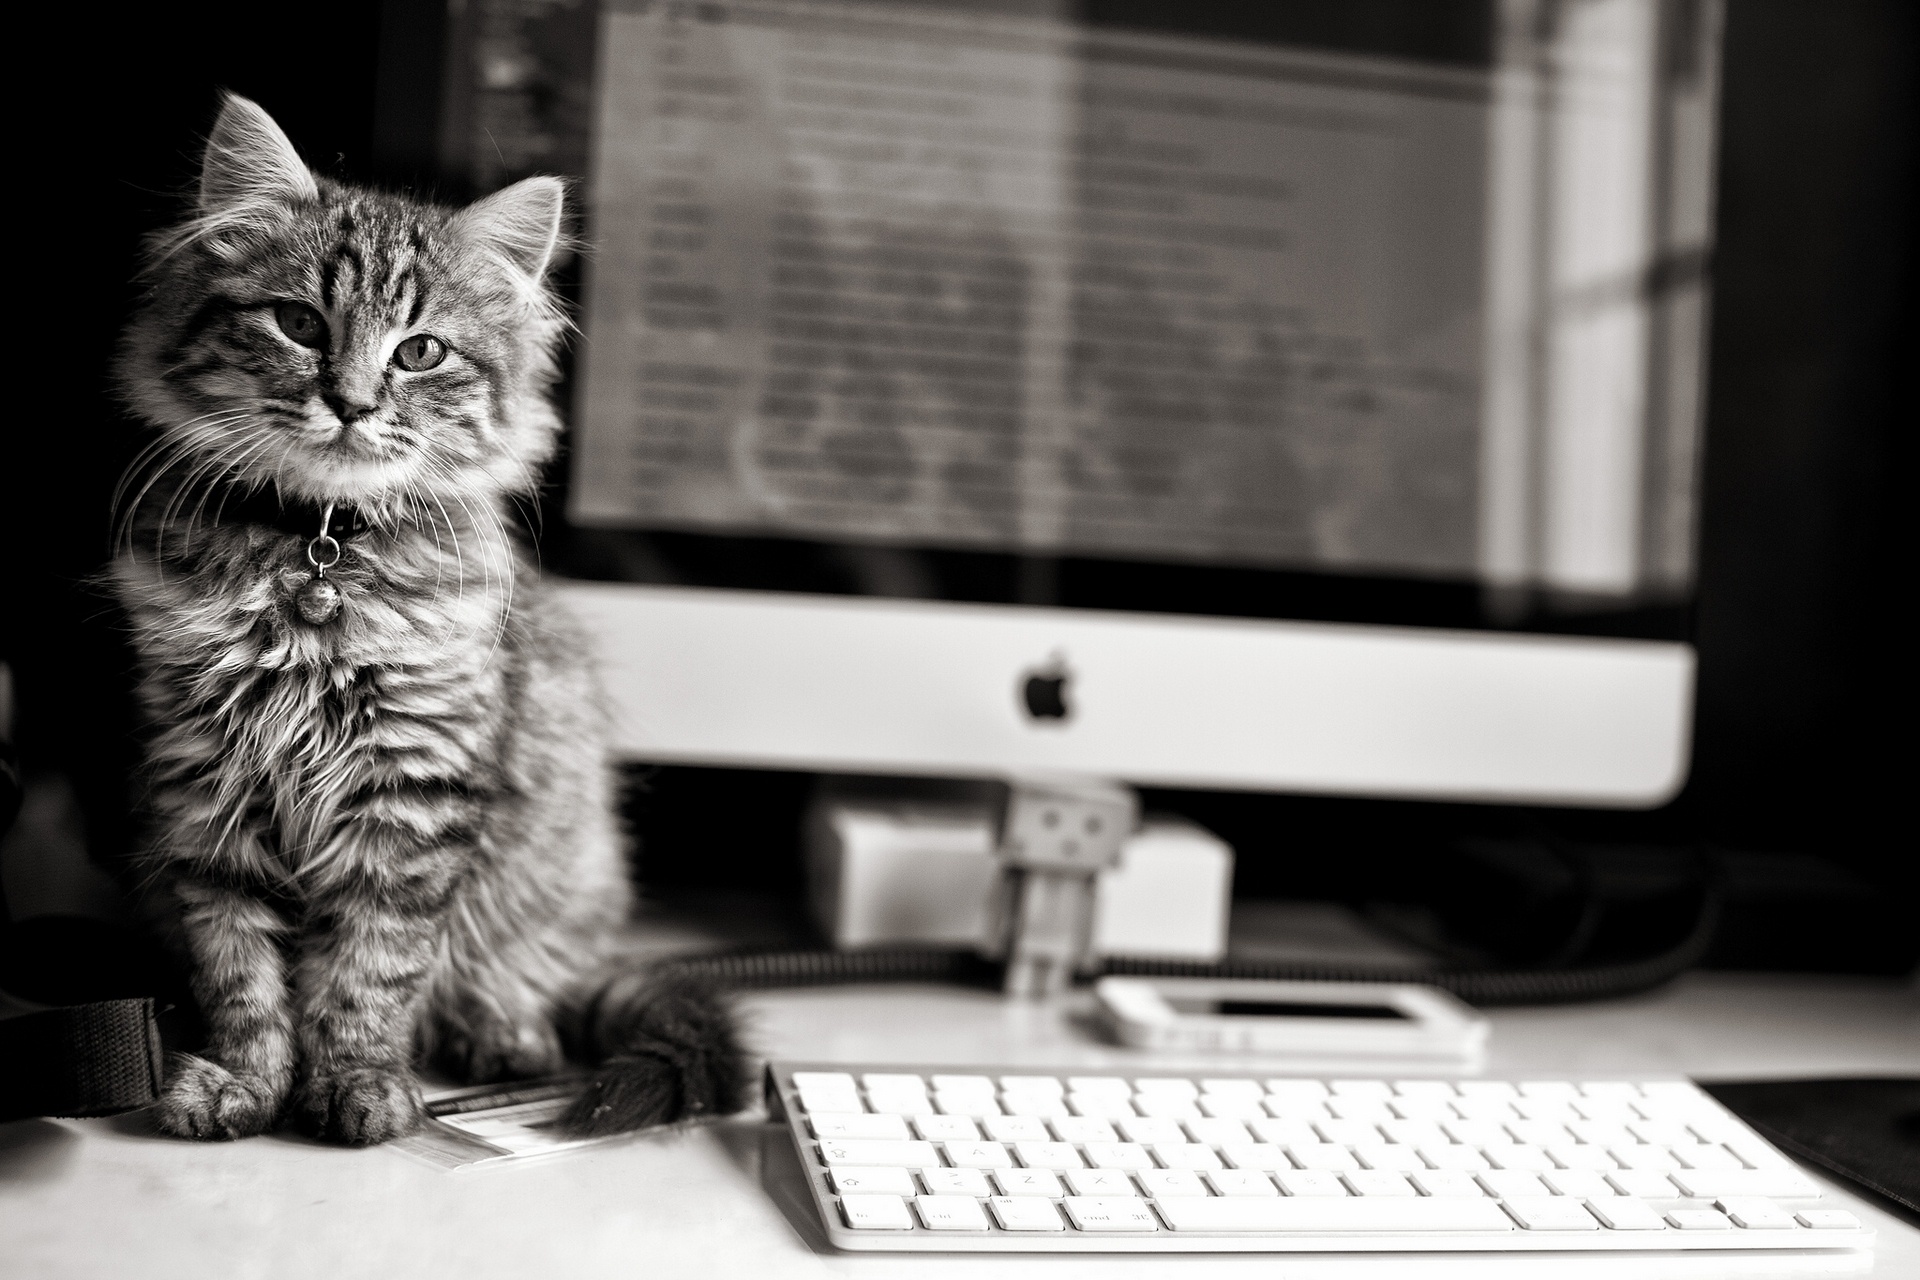 Free photo A kitten sits by a computer in a monochrome photo